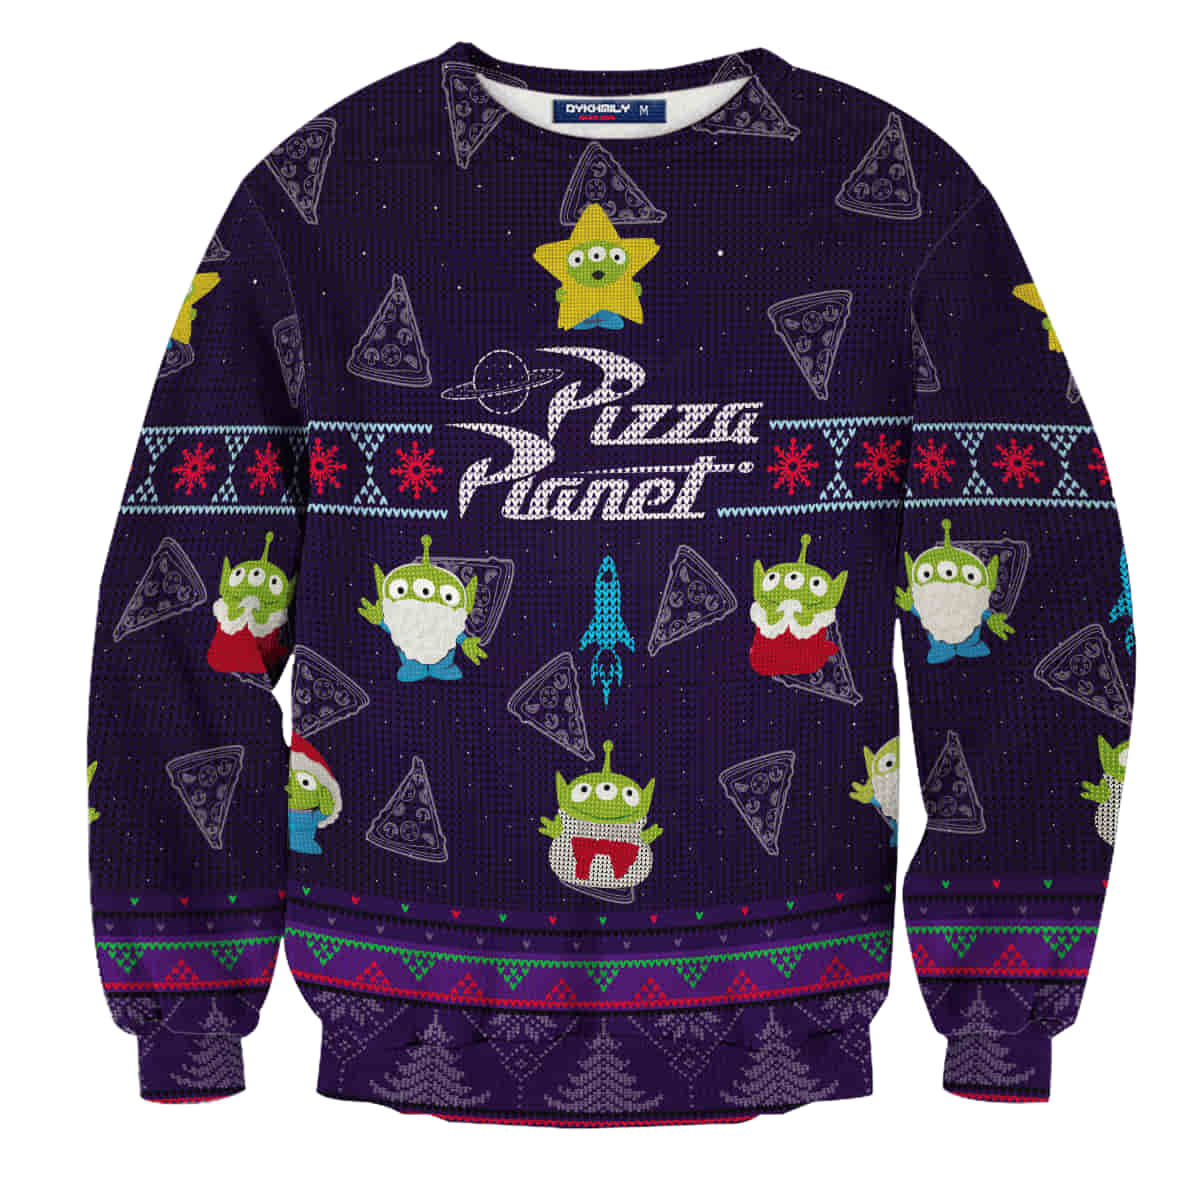 Pizza Planet Christmas Wool Knitted Sweater